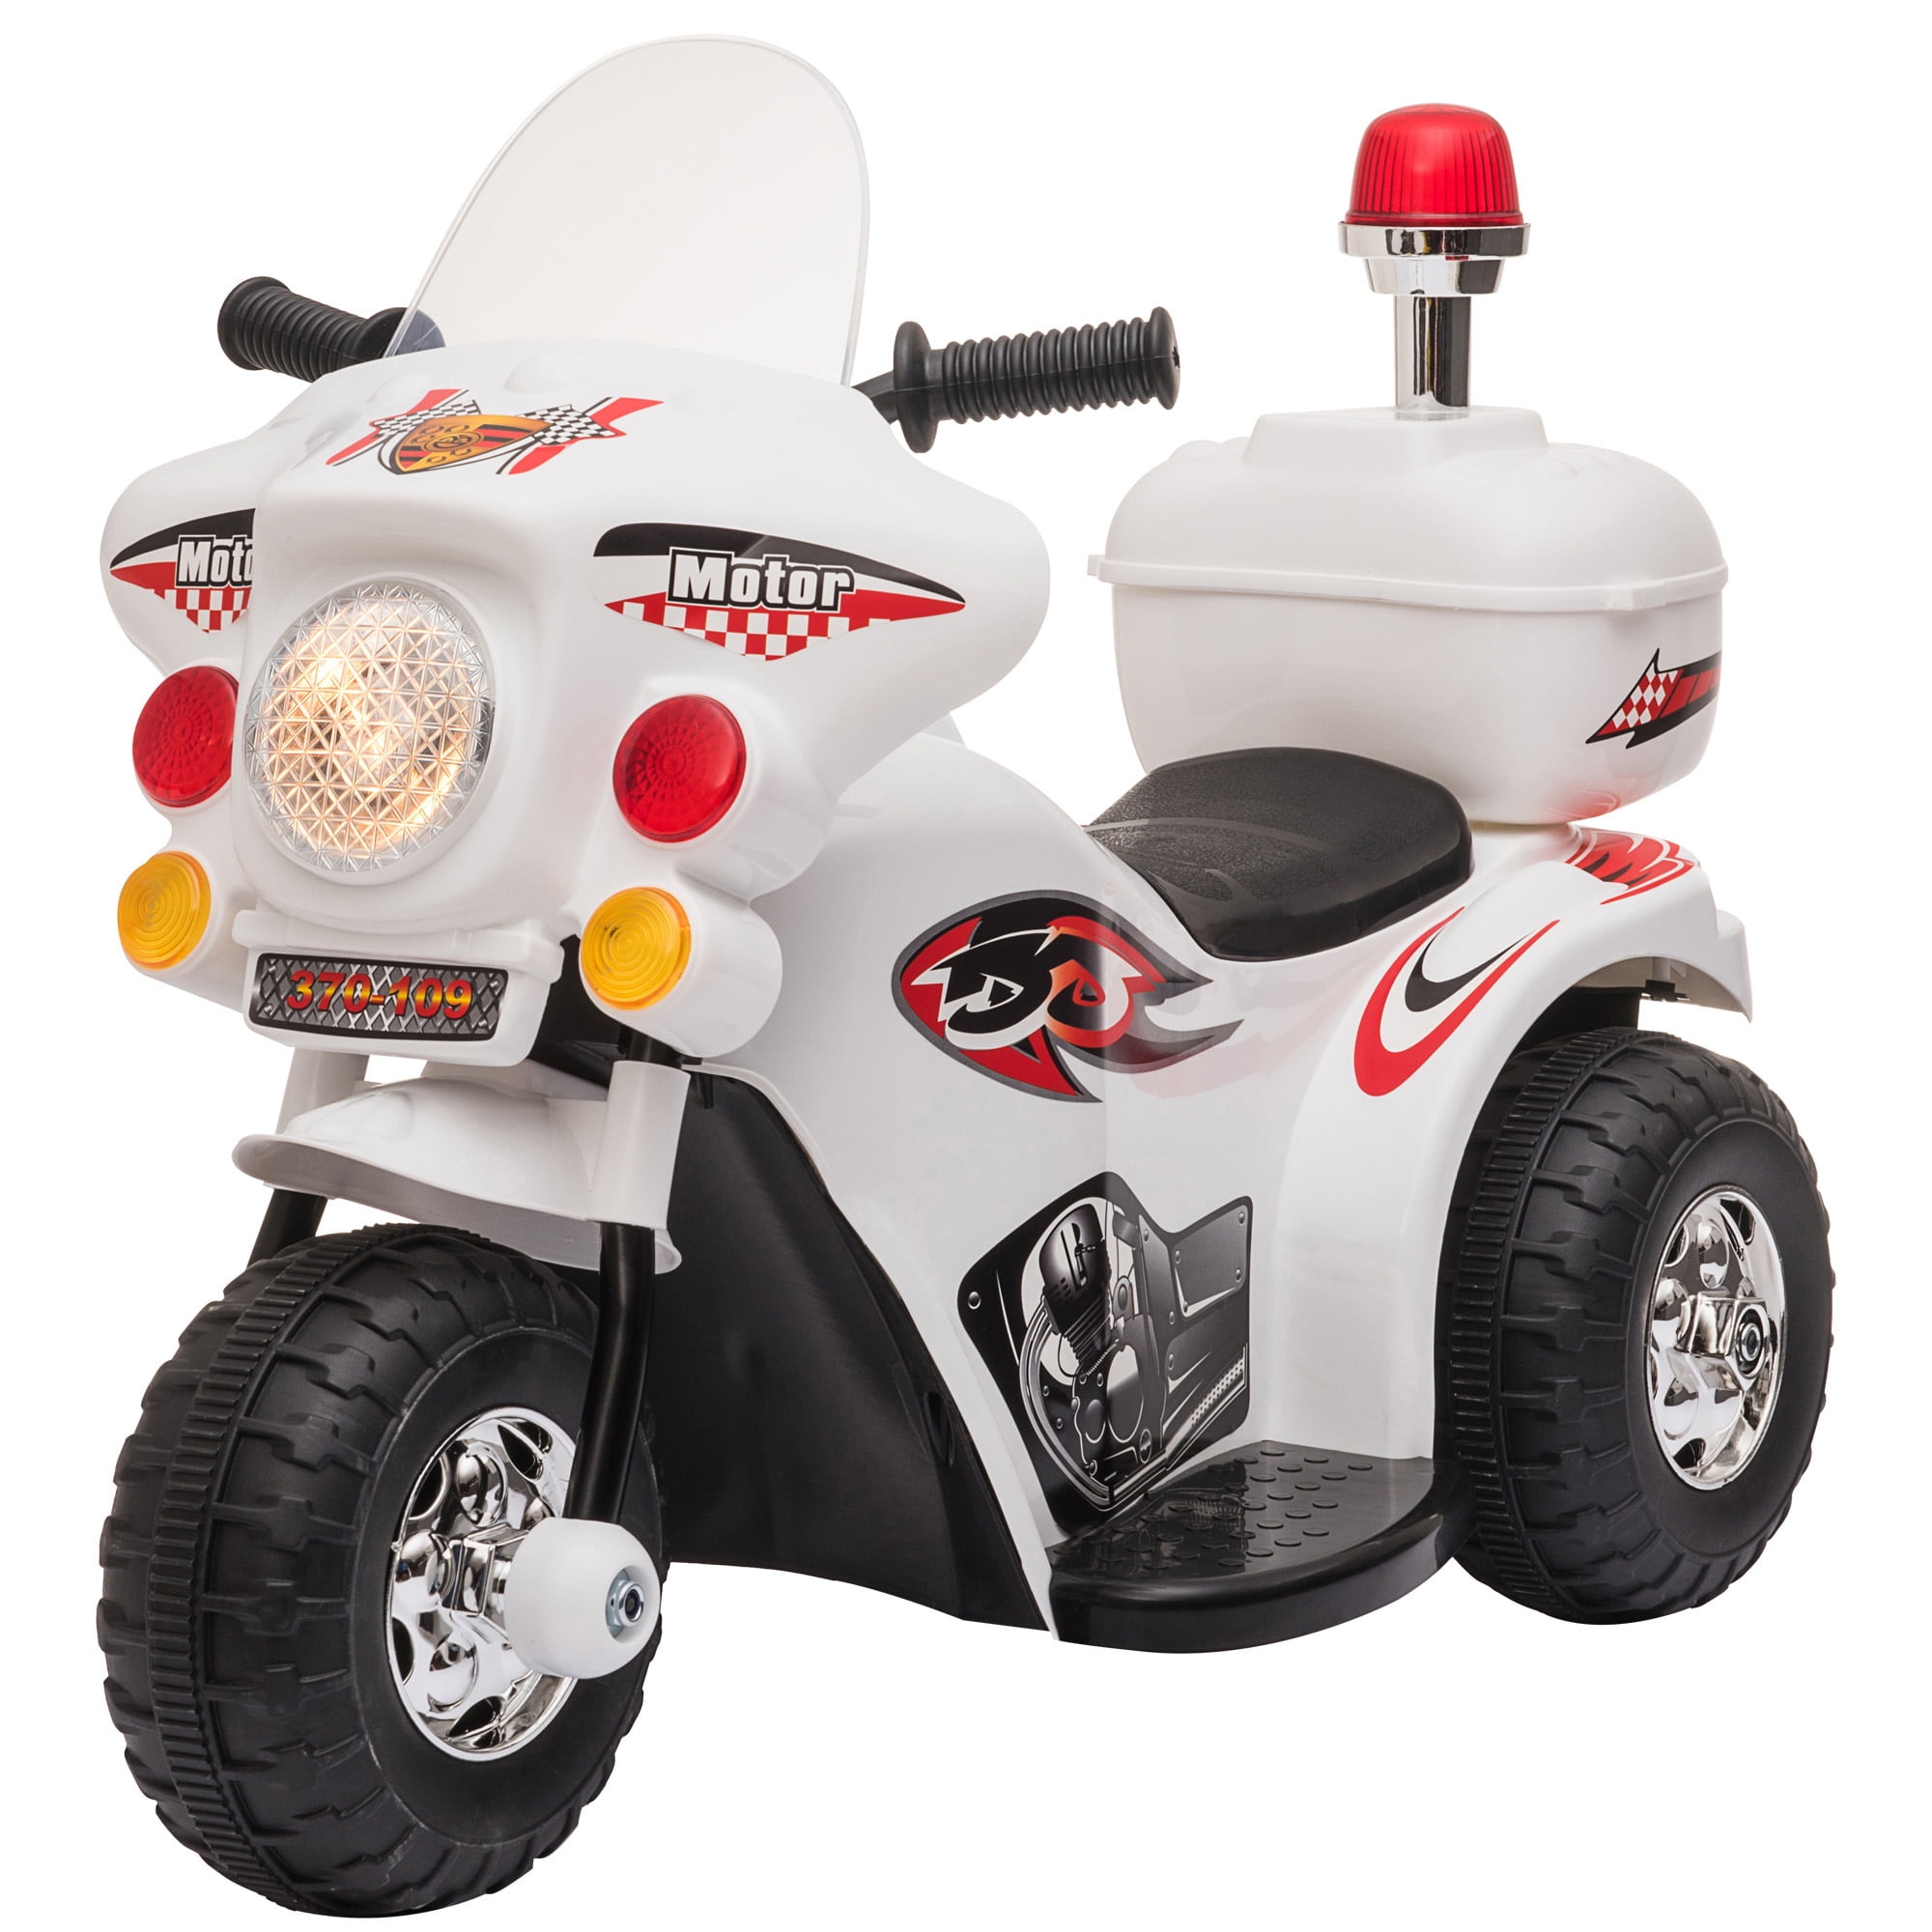 3 Wheel Kids Ride On Motorcycle 6V Battery Powered Electric Toy Power BicycleNew 